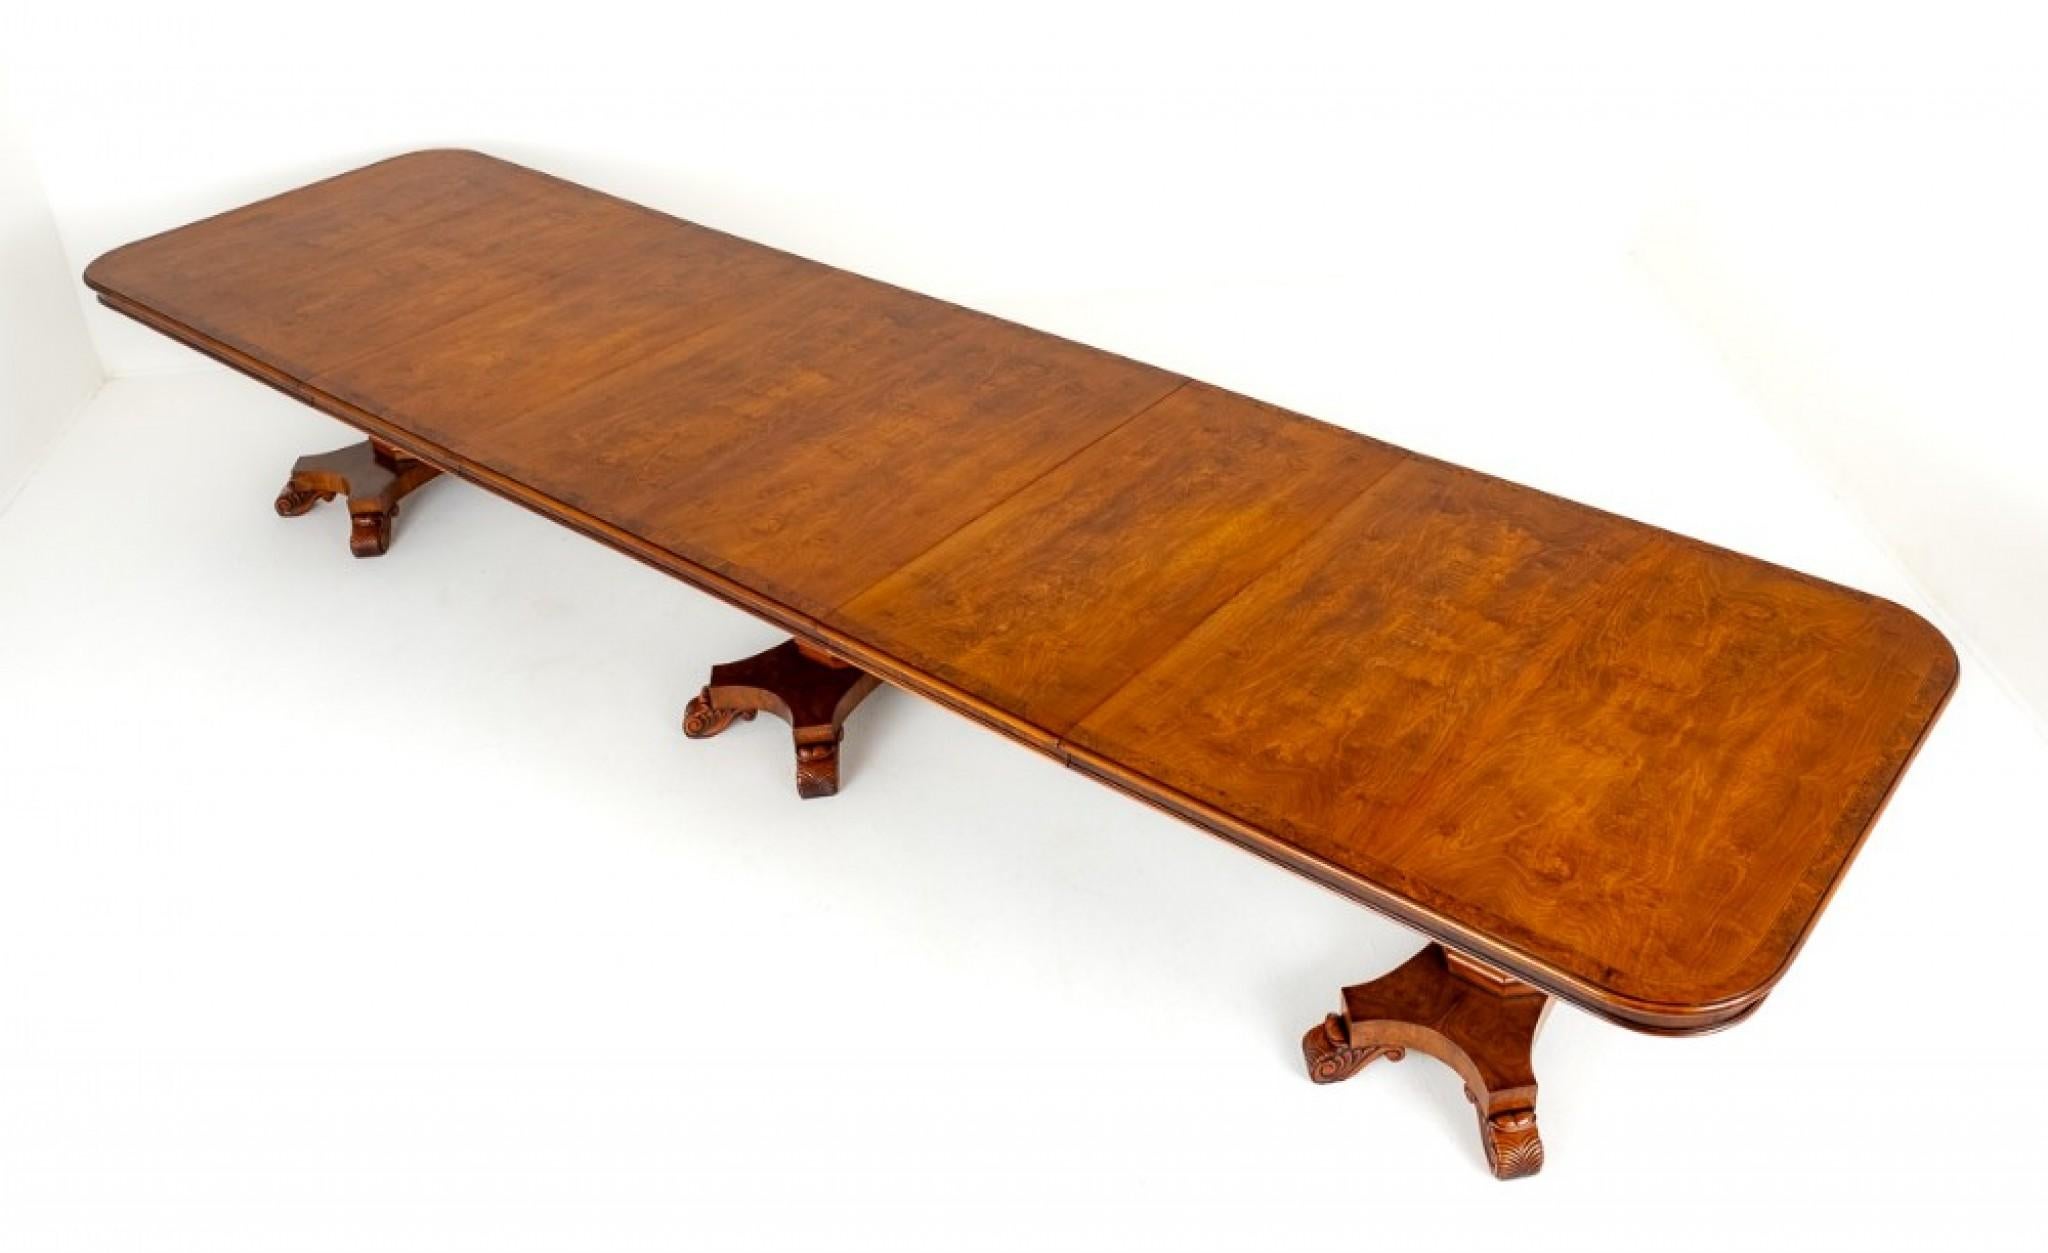 Superb Walnut Dining Table in the Manner of George Bullock.
This Wonderful Table is Raised Upon 3 Pedestals Which Feature Platform Bases, Carved Feet and Octagonal Columns.
Circa 1920
The Top of the Table Being of a Round Cornered Form and Having